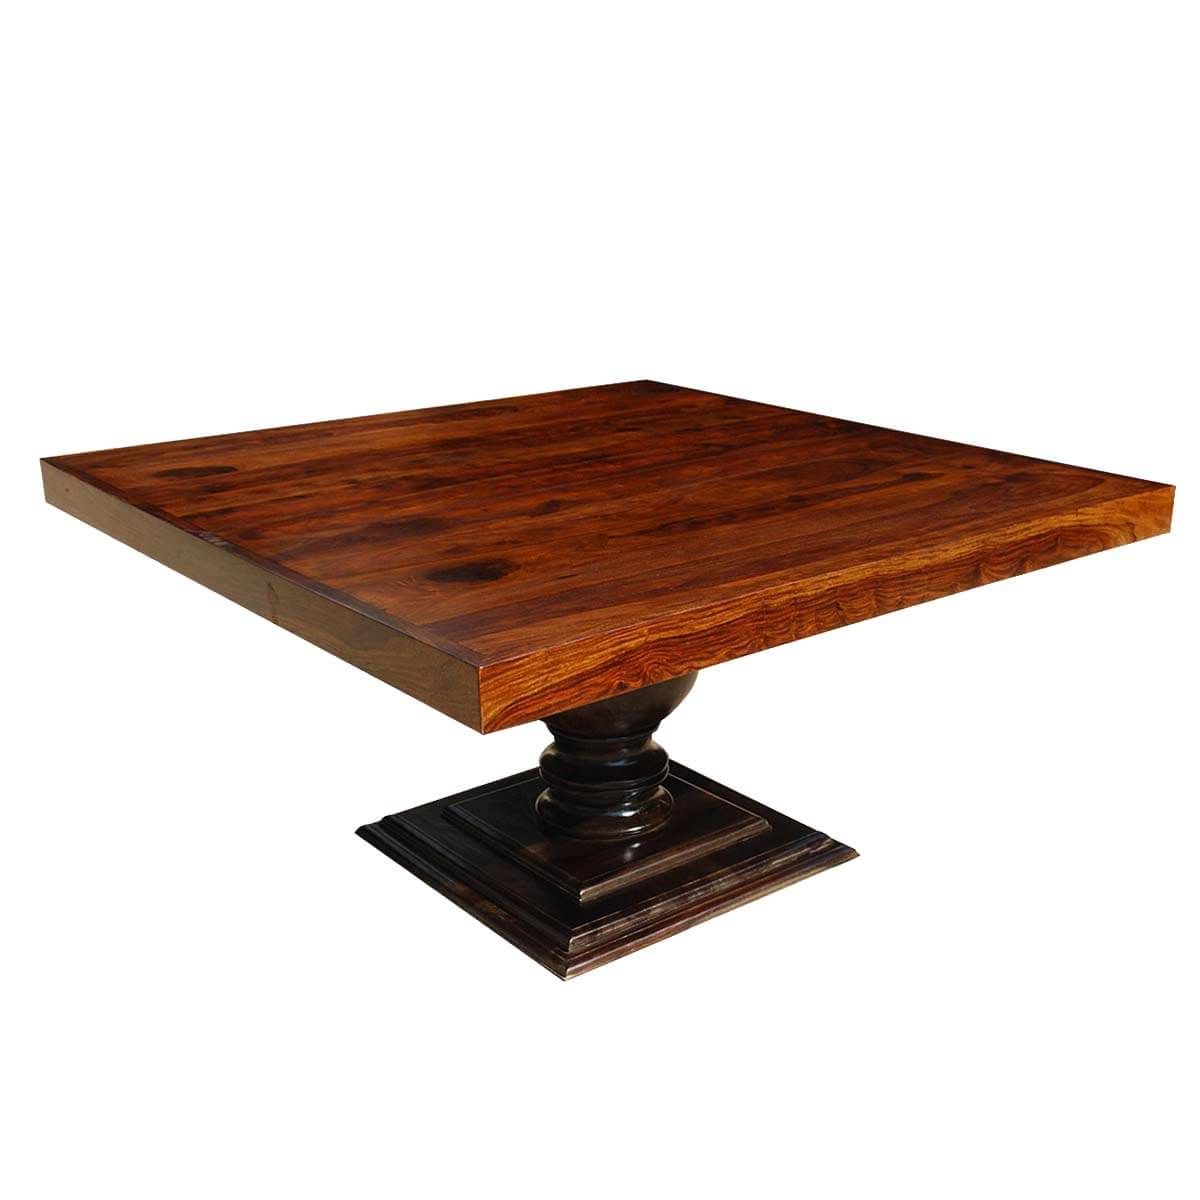 Best And Newest Sevinc Pedestal Dining Tables Regarding Minneapolis Rustic Solid Wood Fusion Pedestal Square (View 15 of 20)